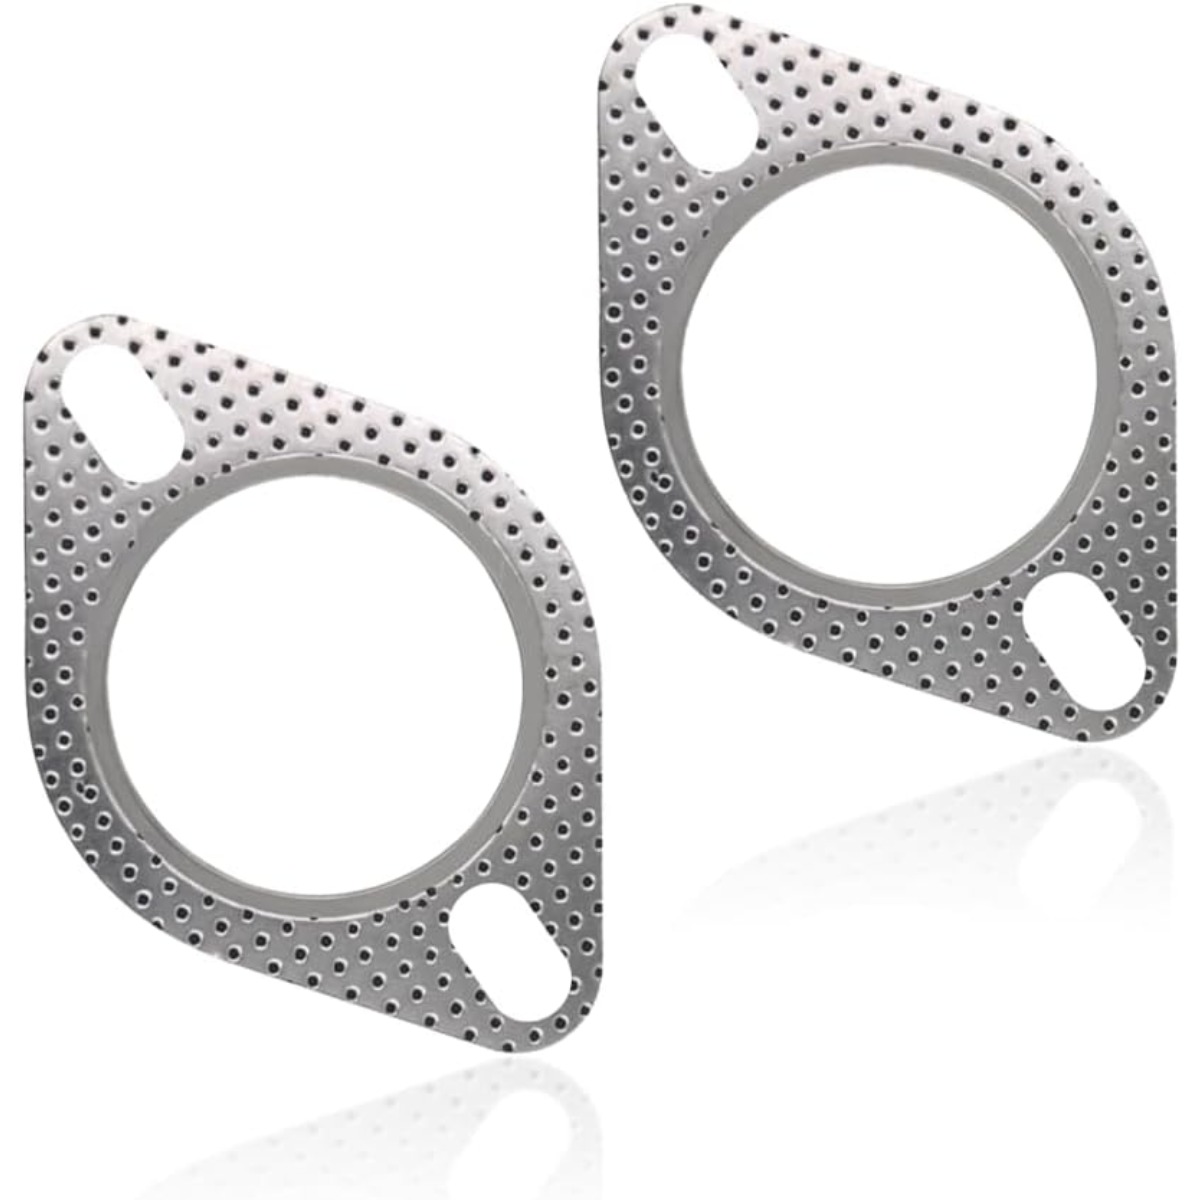 2PCS 2.5 Car Exhaust Gasket,2-Bolt Exhaust Manifold Gasket with High Temp  Gasket Material,Perfect Replacement OEM#120-06310-0002 for Original Exhaust